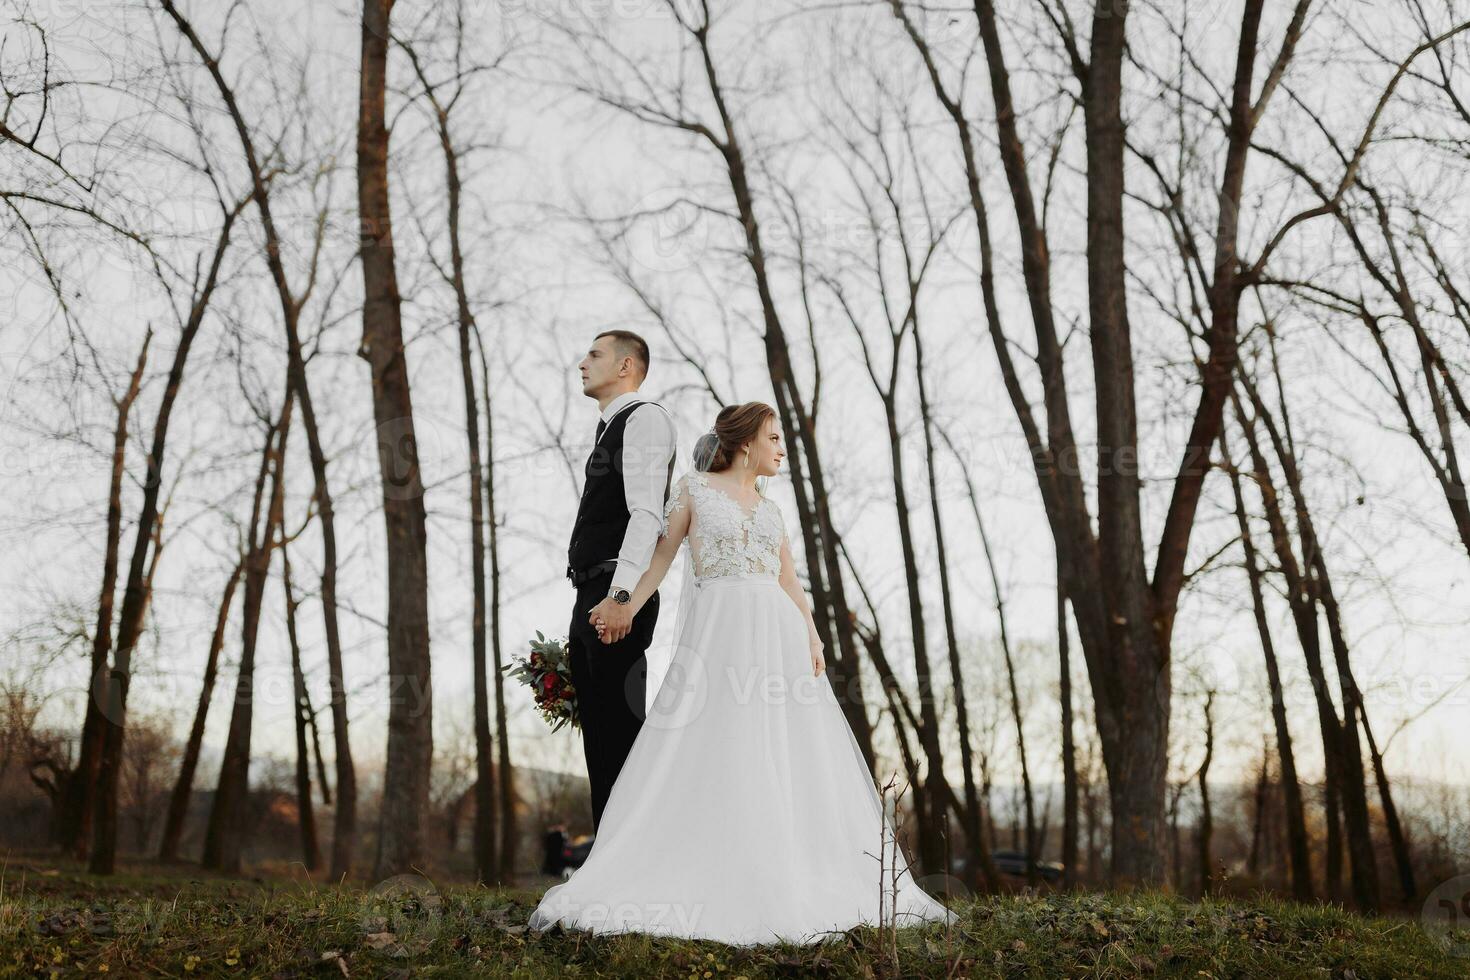 Wedding photo. The bride and groom are standing back to back in the forest. Long wedding dress. A couple in love among tall trees. Autumn sunlight. photo